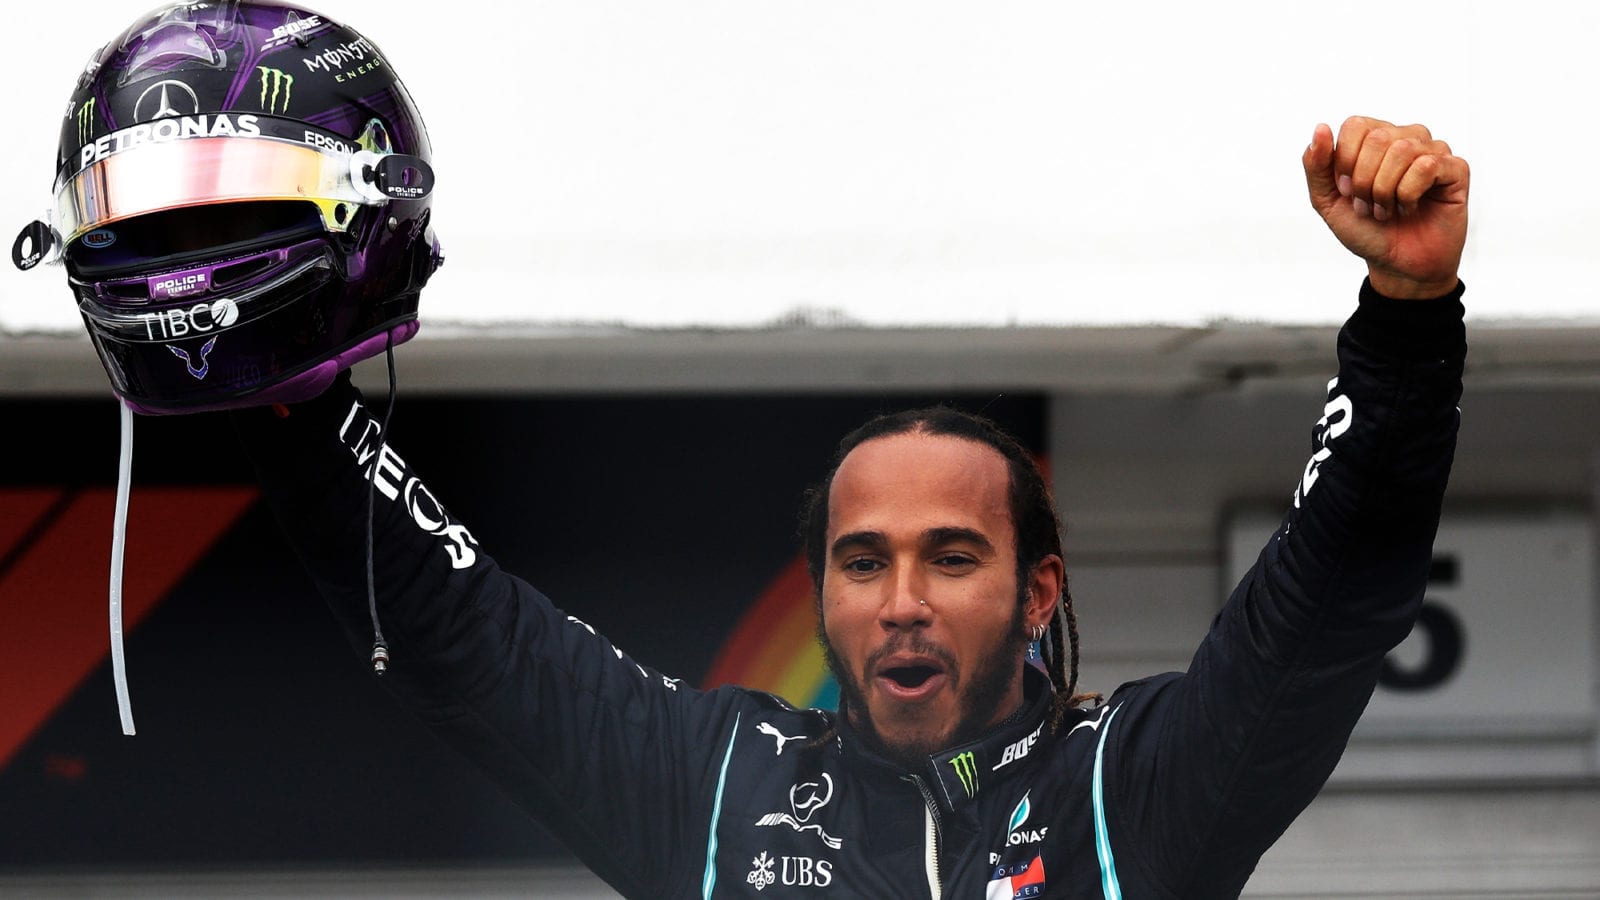 Lewis Hamilton throws his arms in the air after winning the 2020 F1 Hungarian Grand Prix